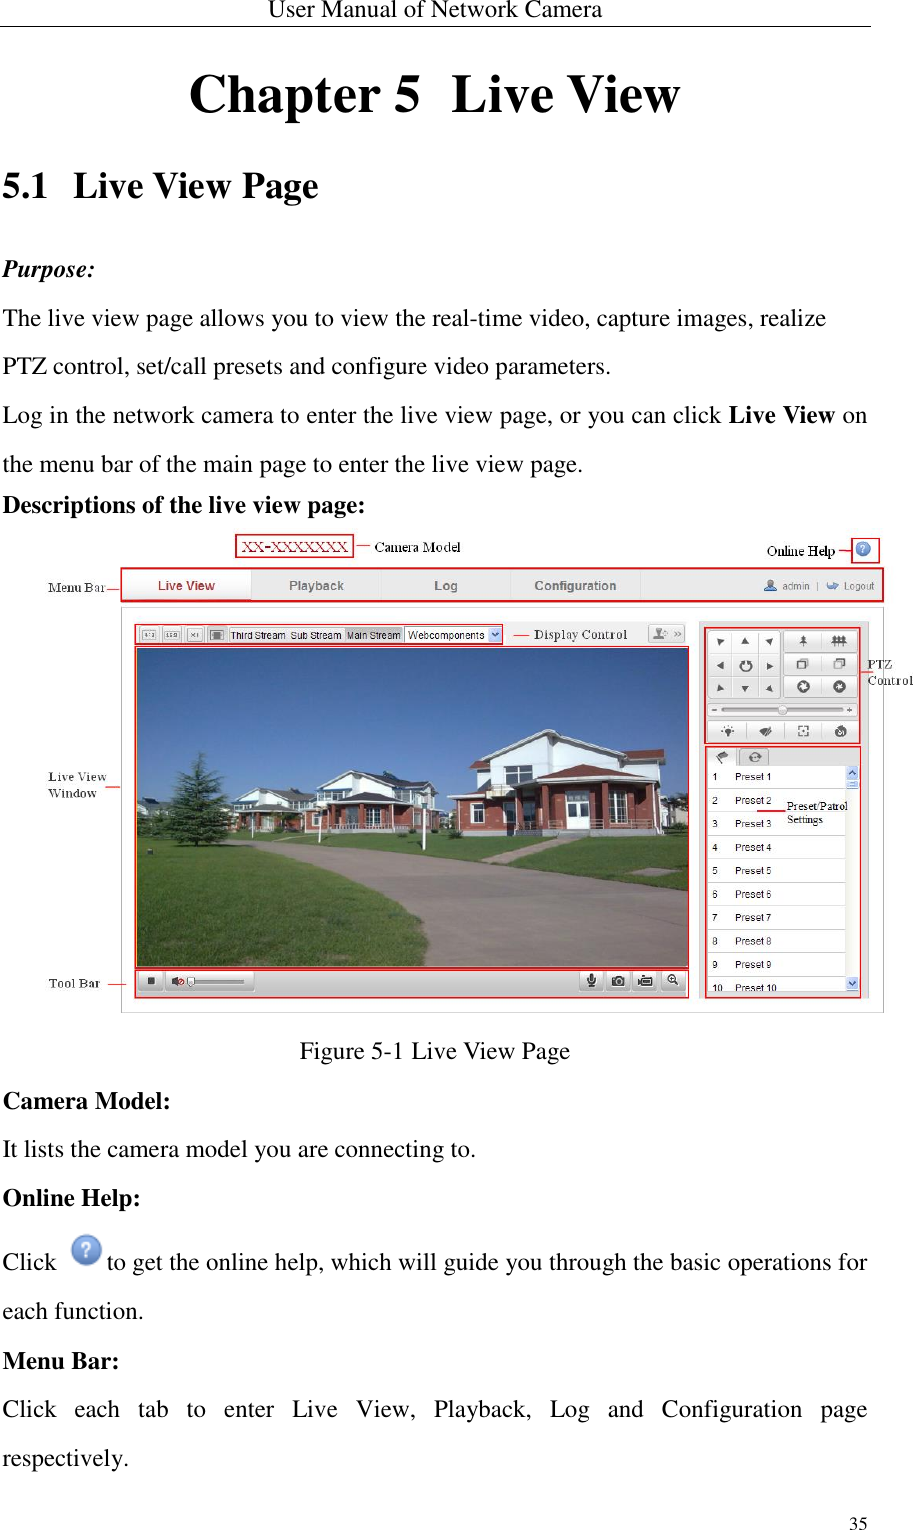 User Manual of Network Camera 35  Chapter 5   Live View 5.1 Live View Page Purpose: The live view page allows you to view the real-time video, capture images, realize PTZ control, set/call presets and configure video parameters. Log in the network camera to enter the live view page, or you can click Live View on the menu bar of the main page to enter the live view page. Descriptions of the live view page:  Figure 5-1 Live View Page Camera Model: It lists the camera model you are connecting to. Online Help: Click  to get the online help, which will guide you through the basic operations for each function. Menu Bar:   Click  each  tab  to  enter  Live  View,  Playback,  Log  and  Configuration  page respectively.   